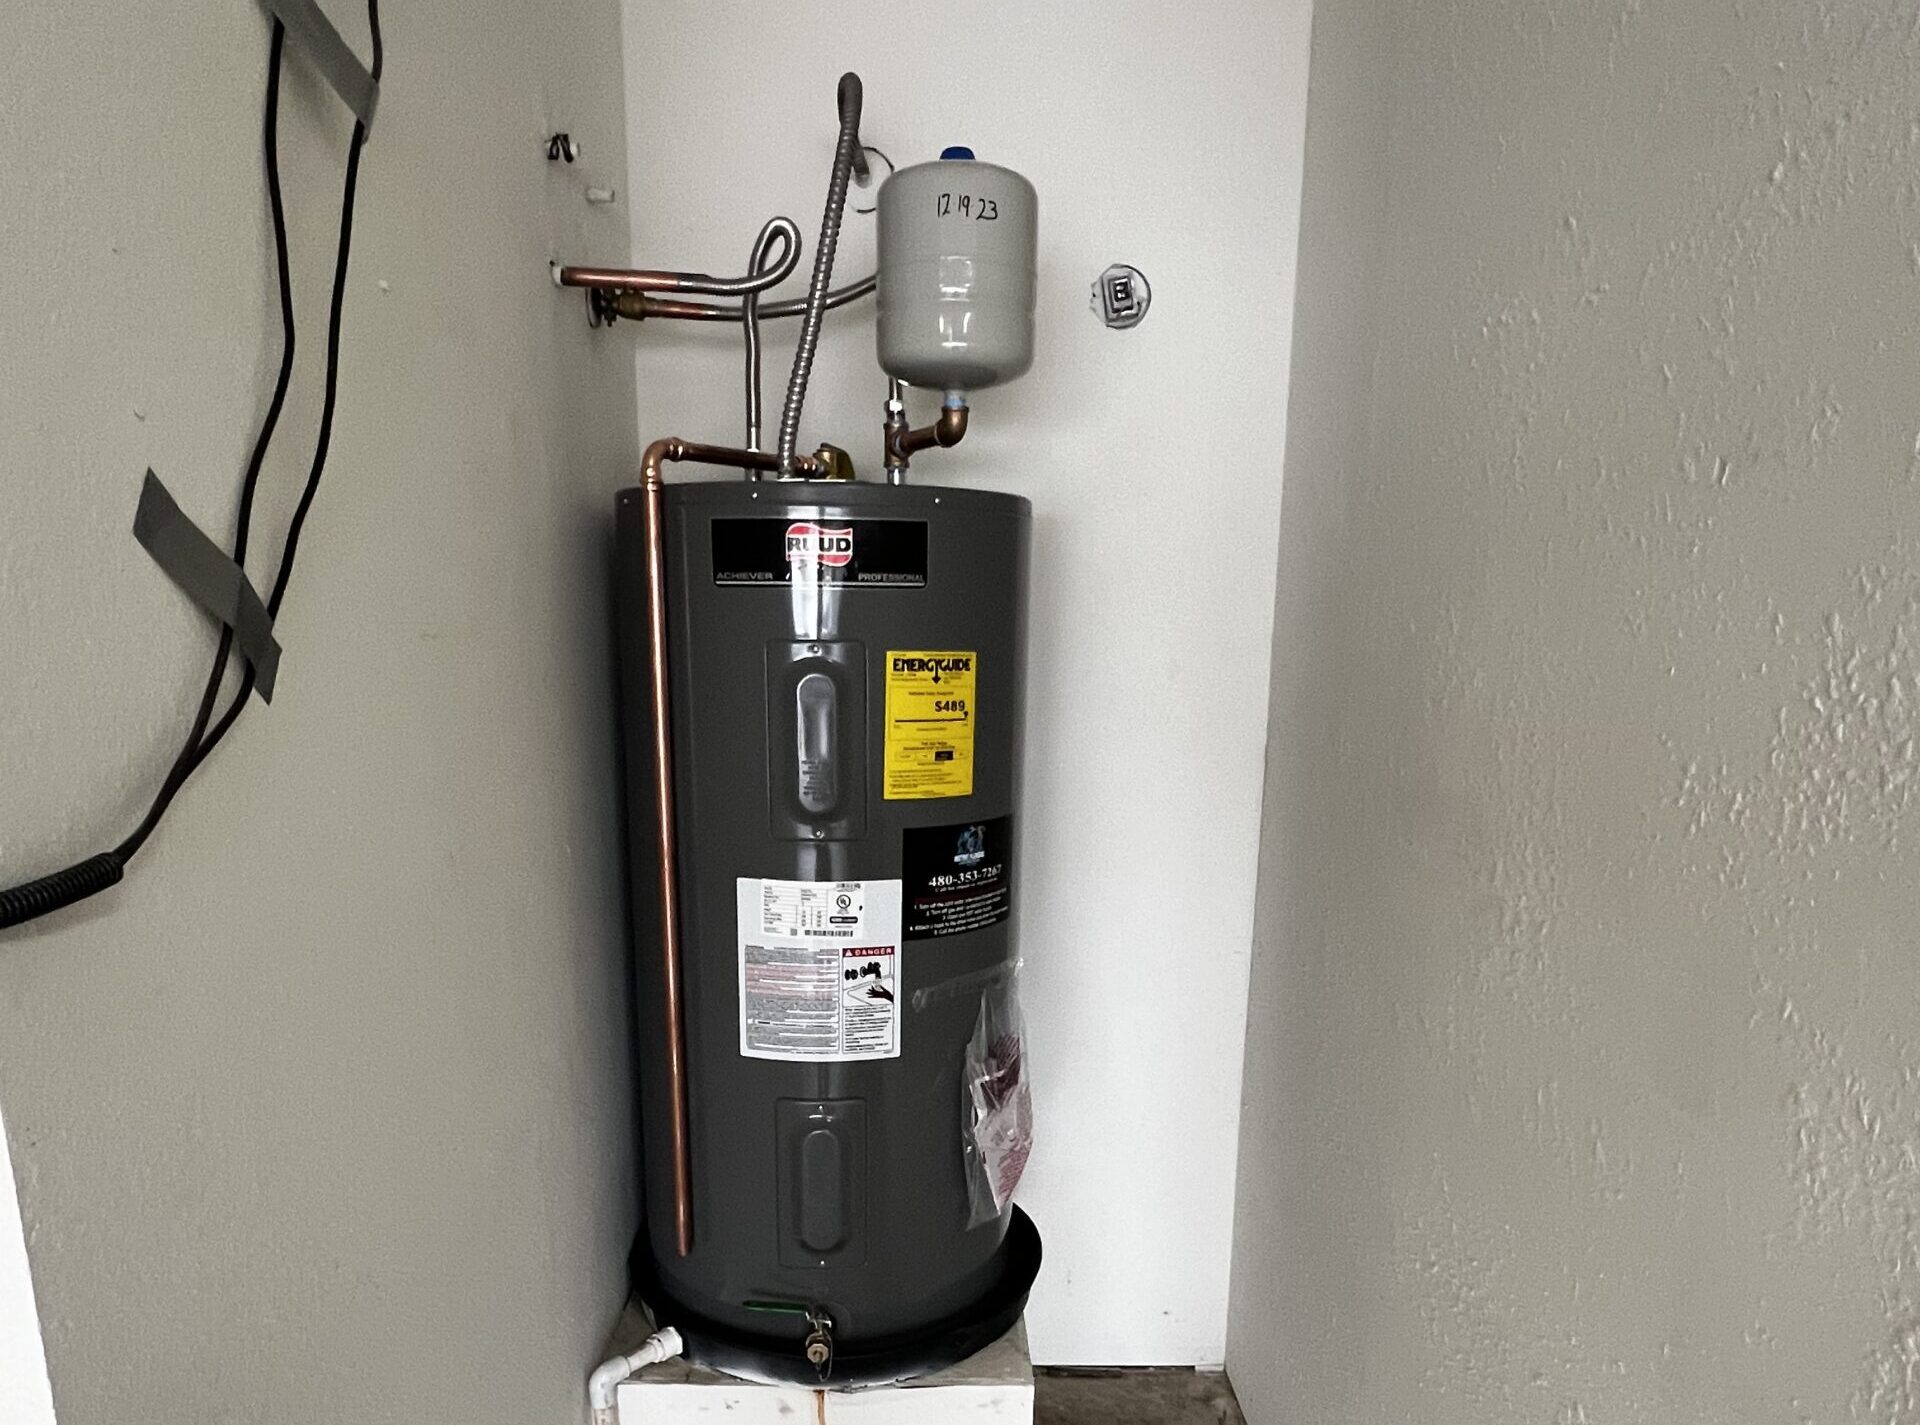 Water Heater Troubles: What to Watch For